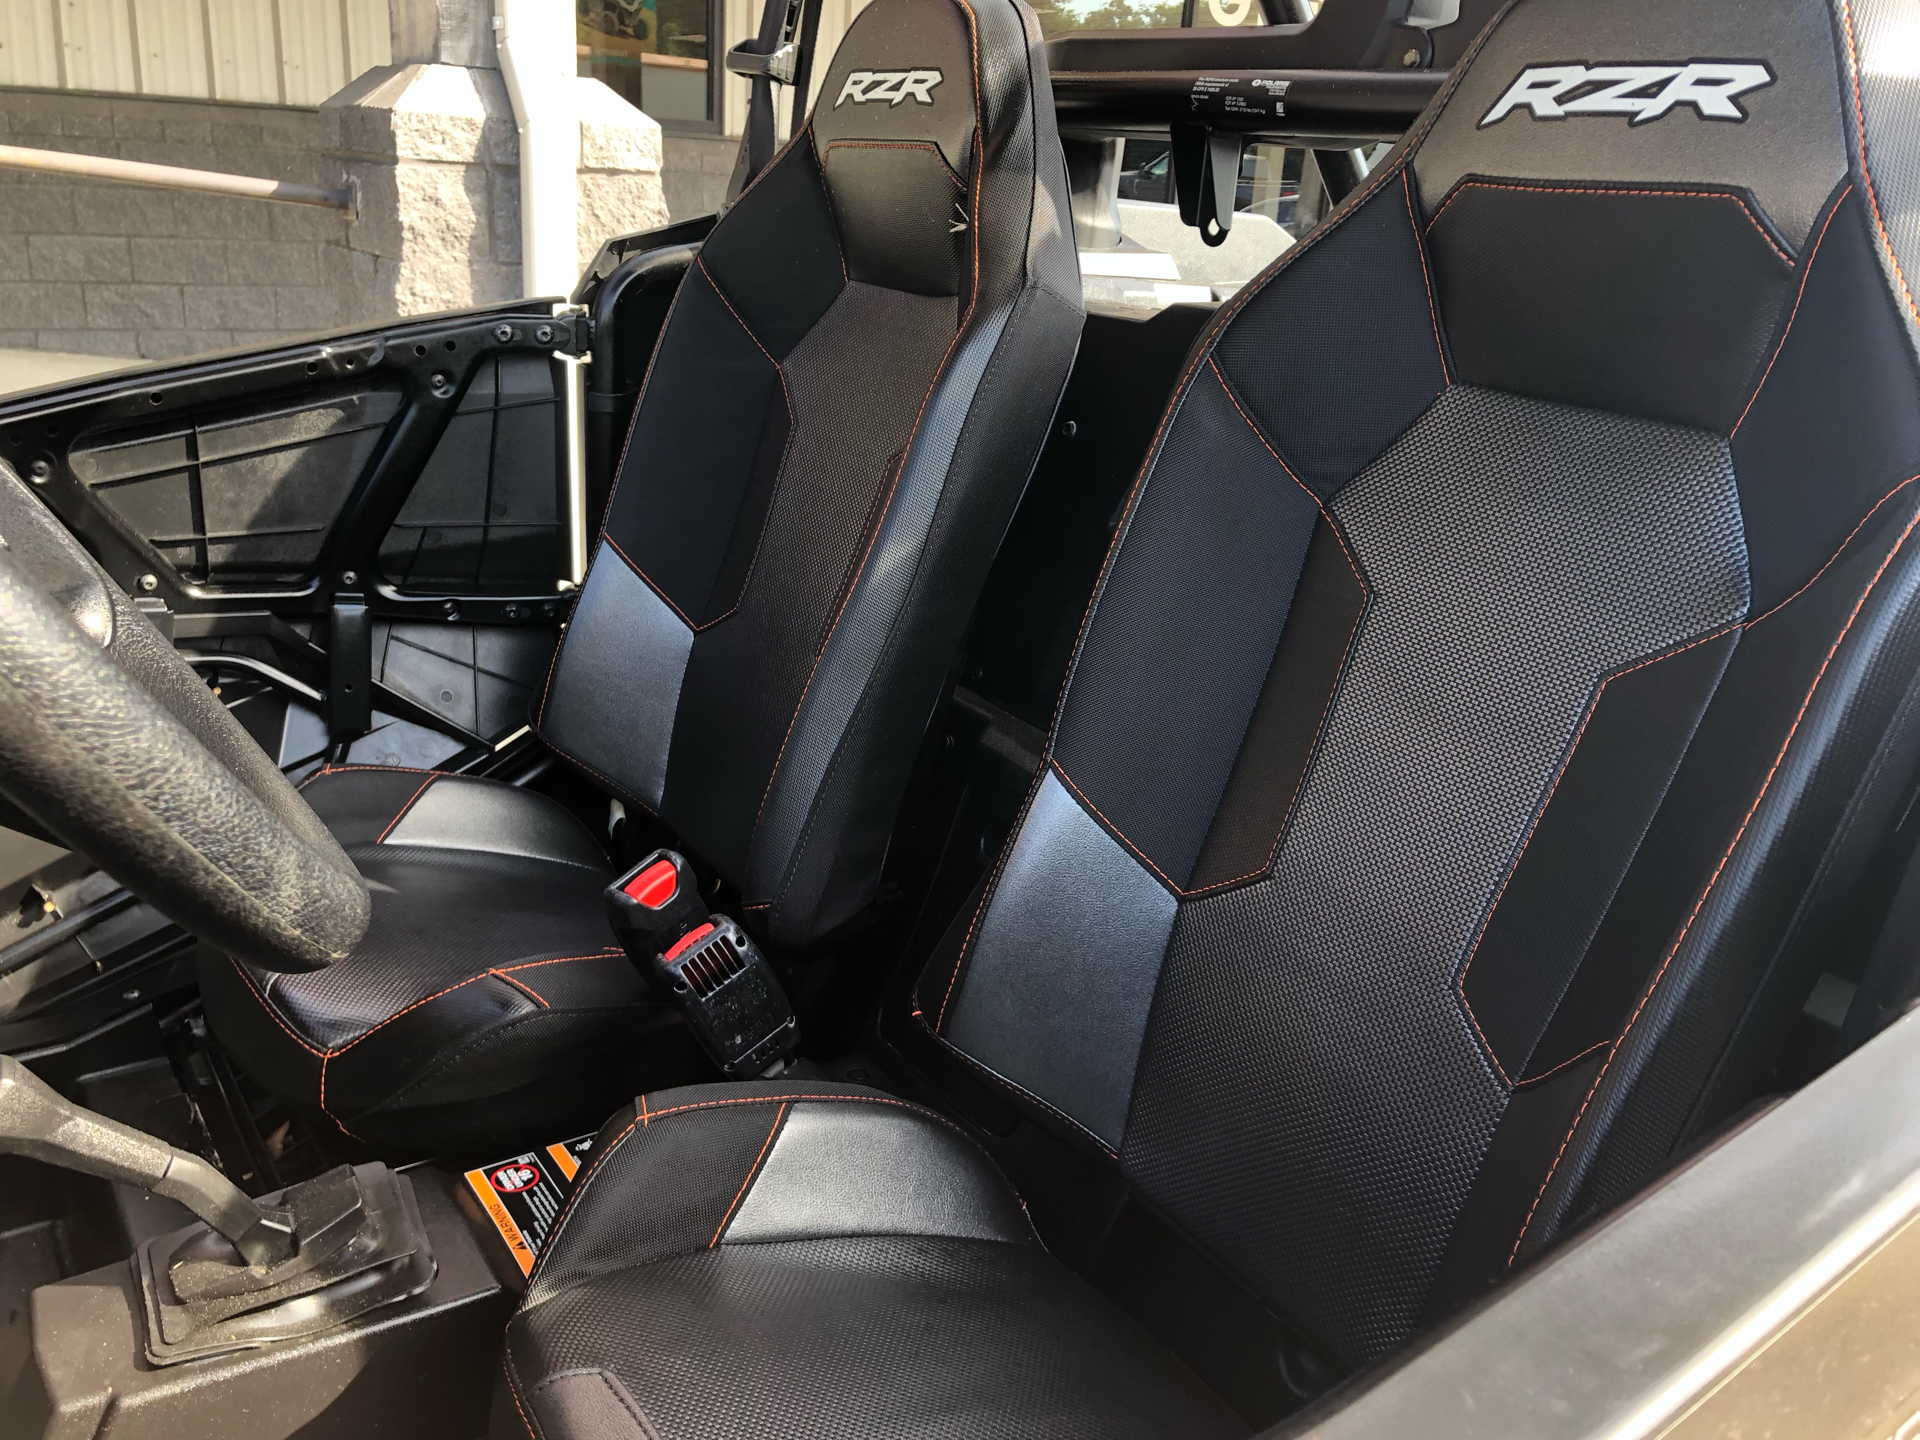 2019 Polaris RZR XP 1000 High Lifter in Leland, Mississippi - Photo 10